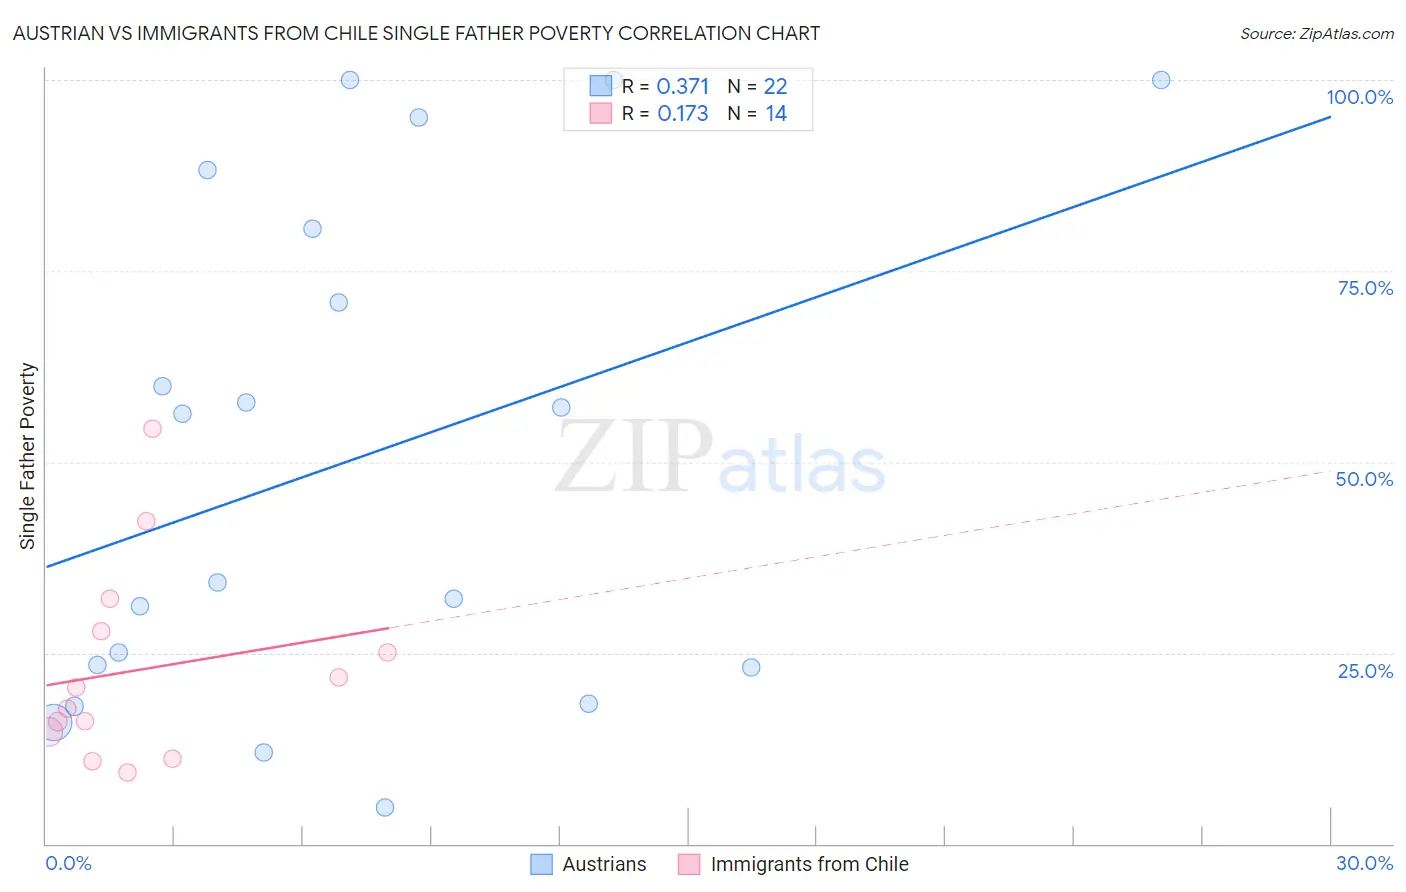 Austrian vs Immigrants from Chile Single Father Poverty